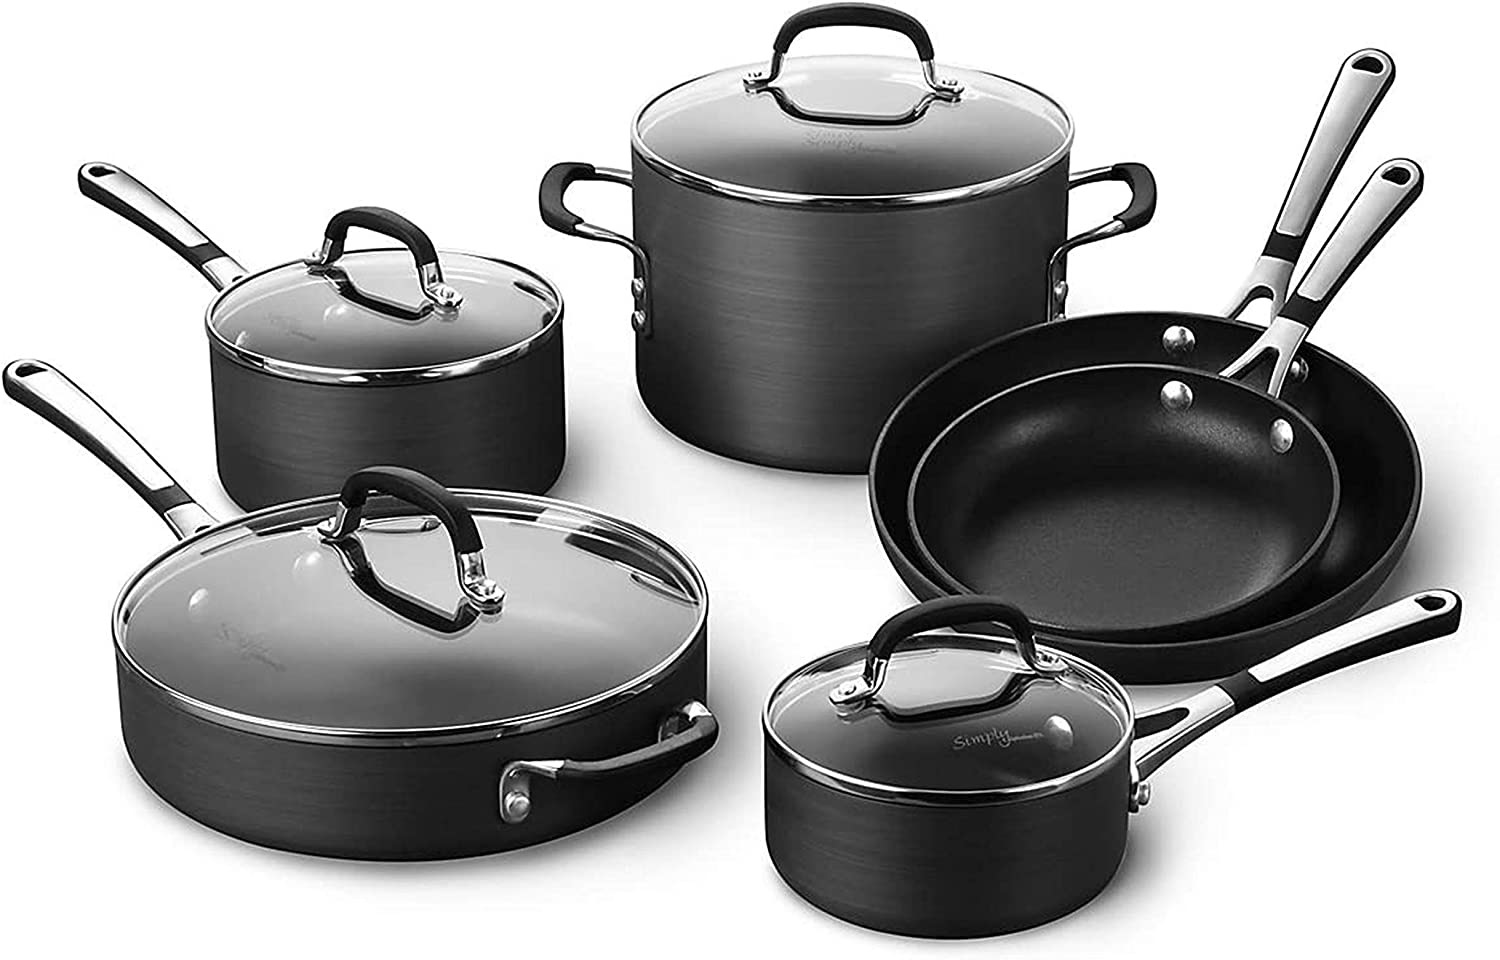 Calphalon hard-anodized aluminum pots and pans set great for a gas stove